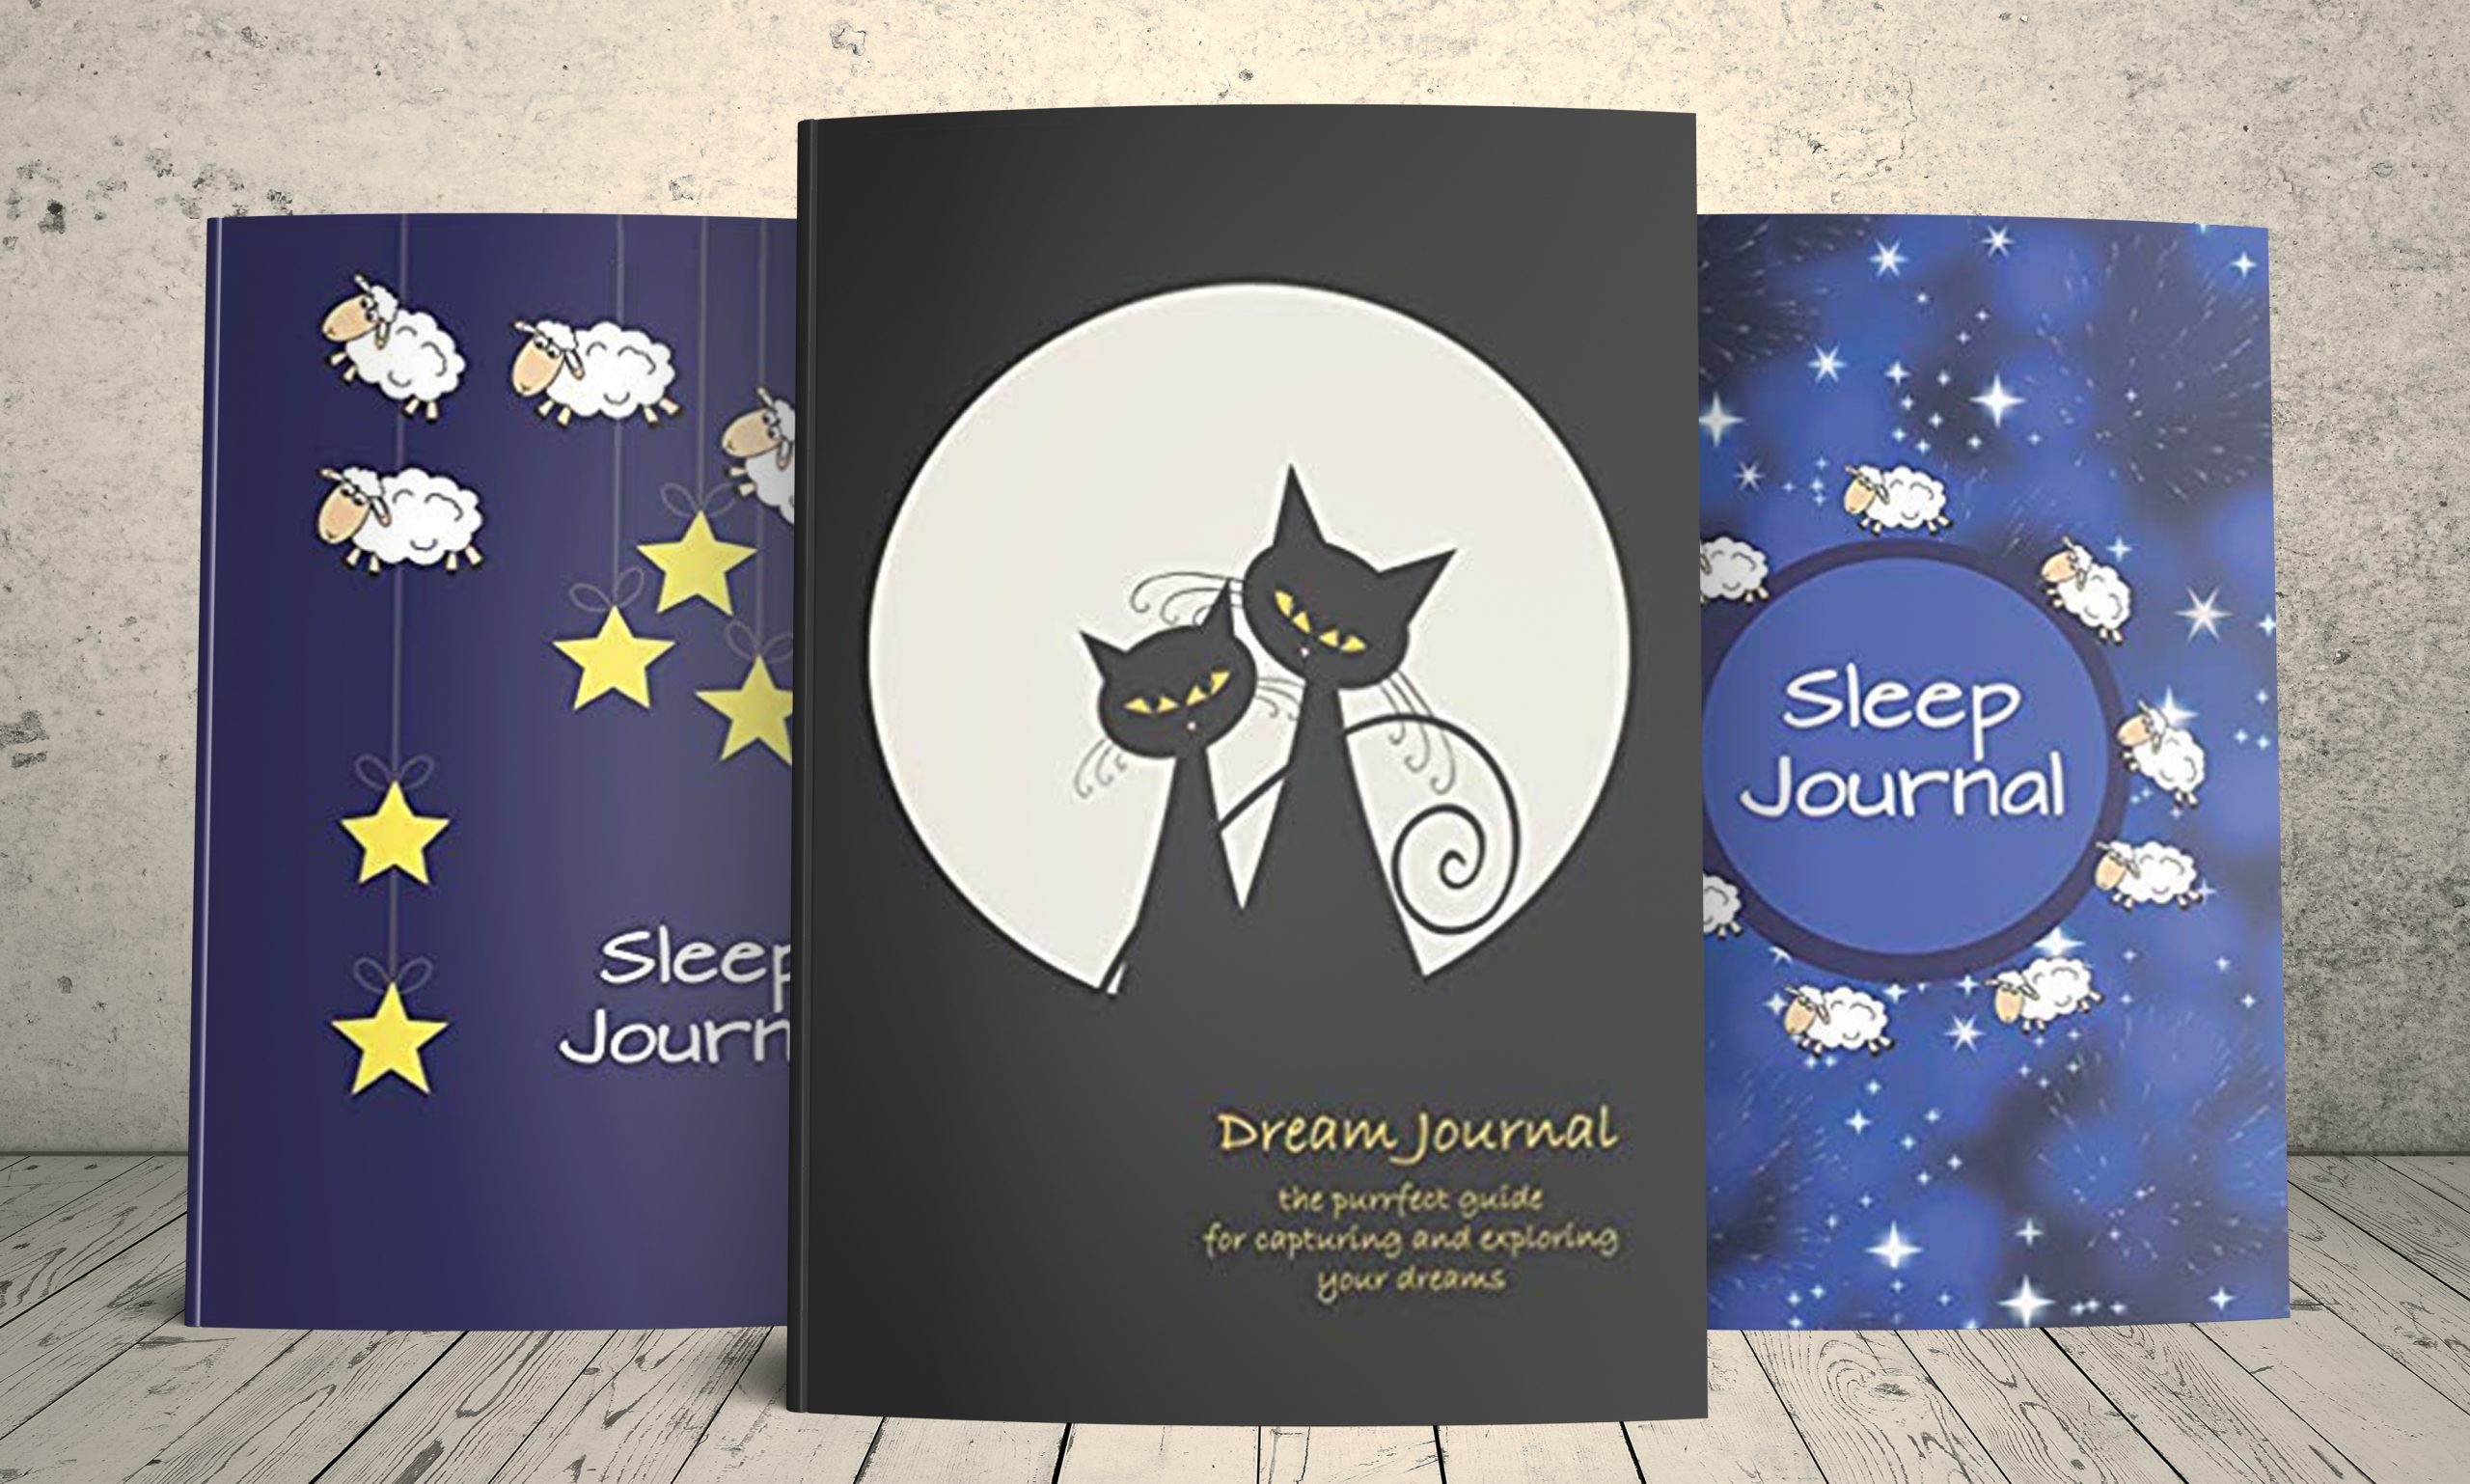 Two sleep journals and one dream journal from Premise Content.